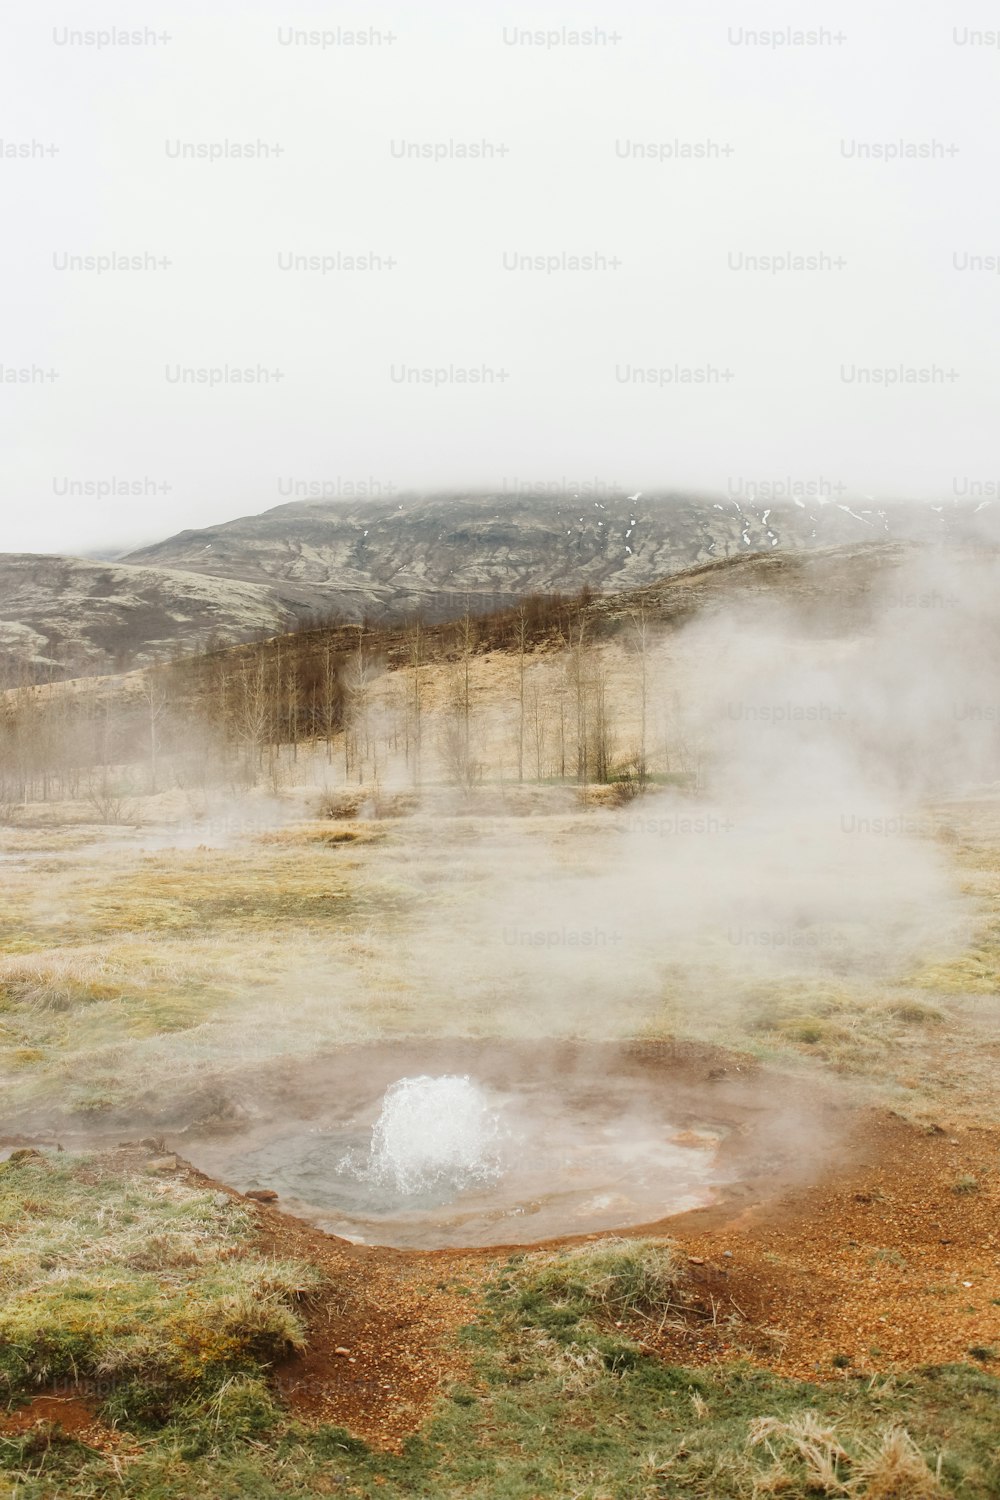 a hot spring in the middle of a field